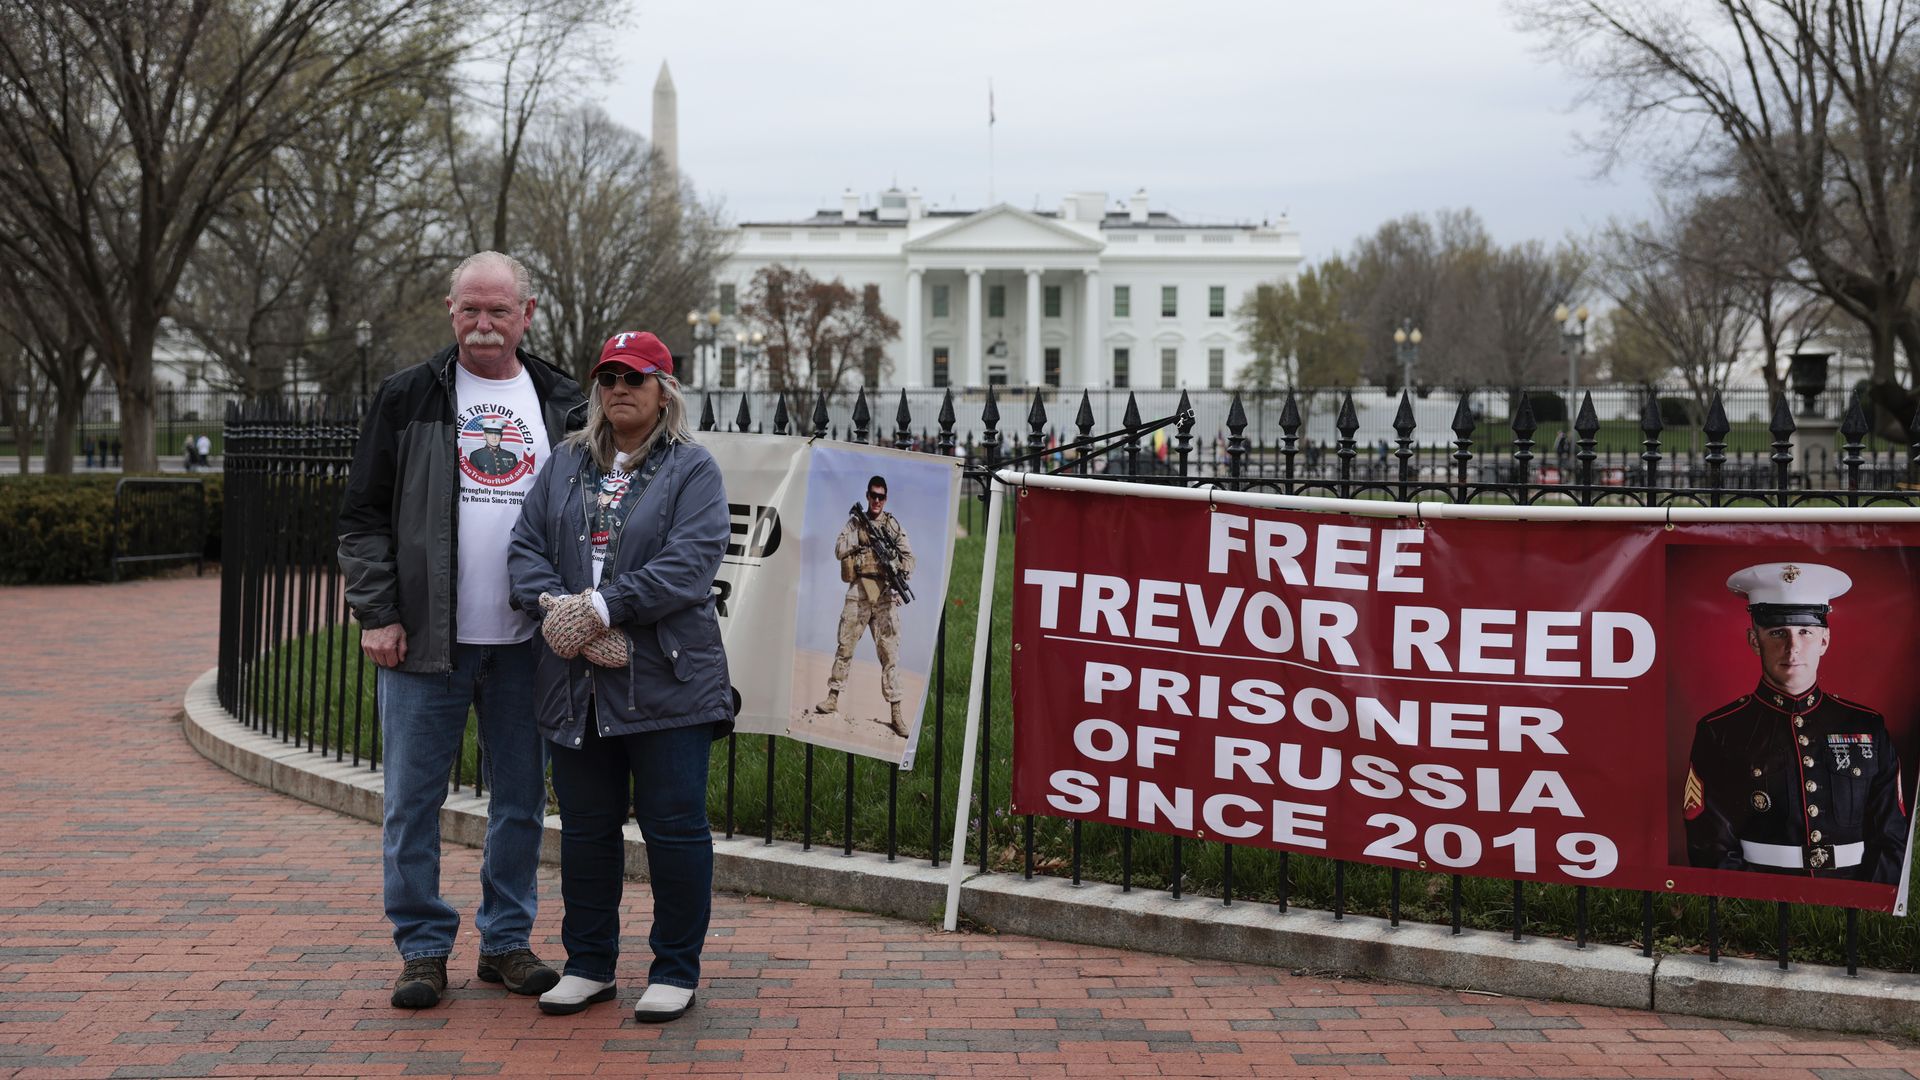 The parents of freed hostage Trevor Reed are seen protesting outside the White House.